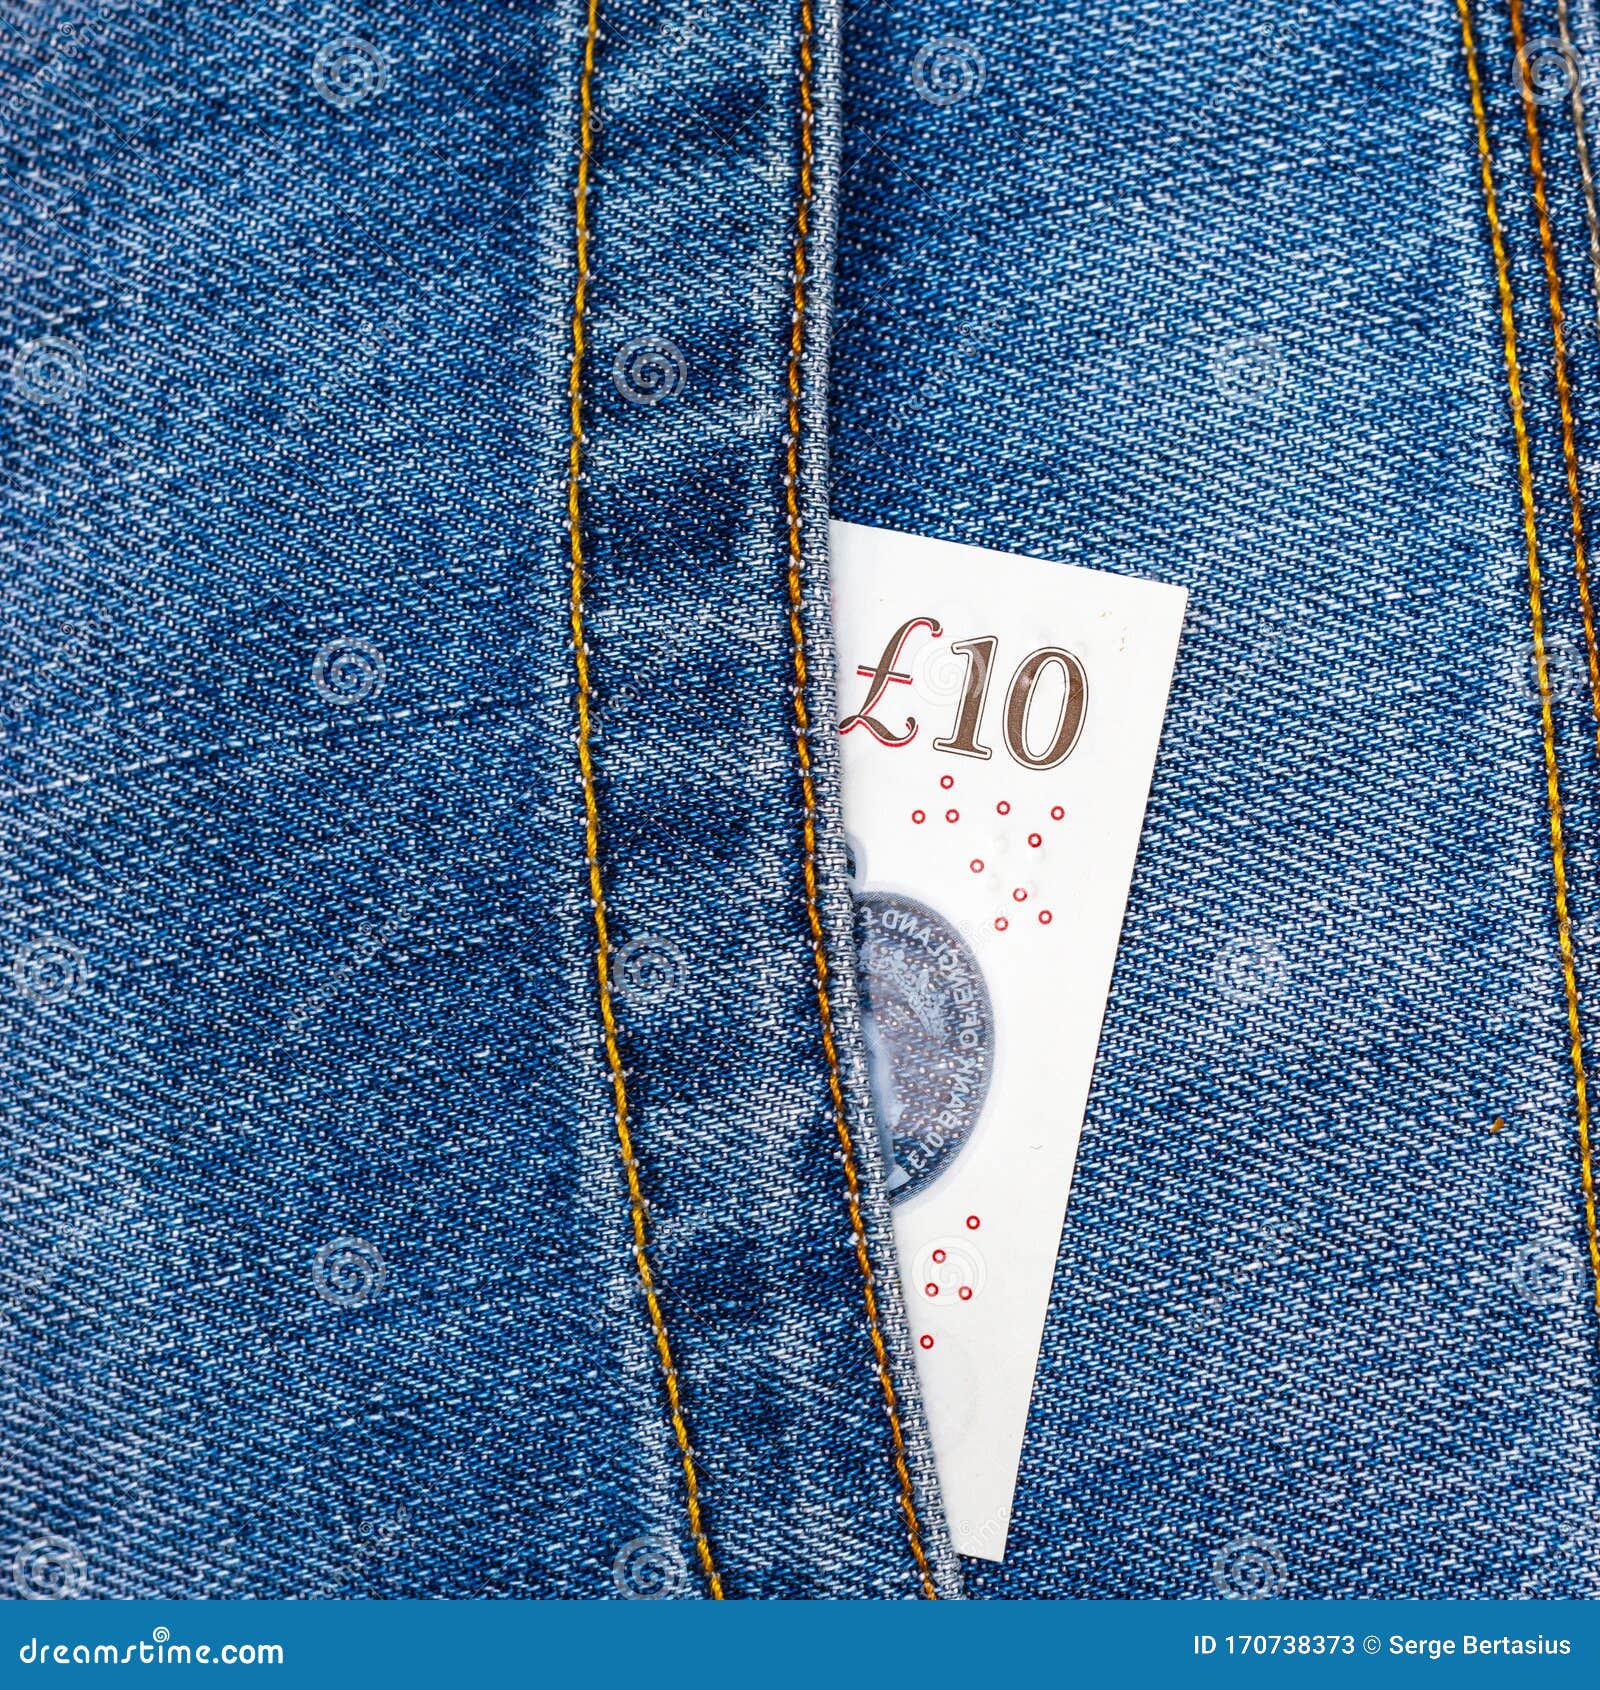 Closeup of Ten Pounds Sterling Banknote Peeking Out of Blue Jeans Back ...